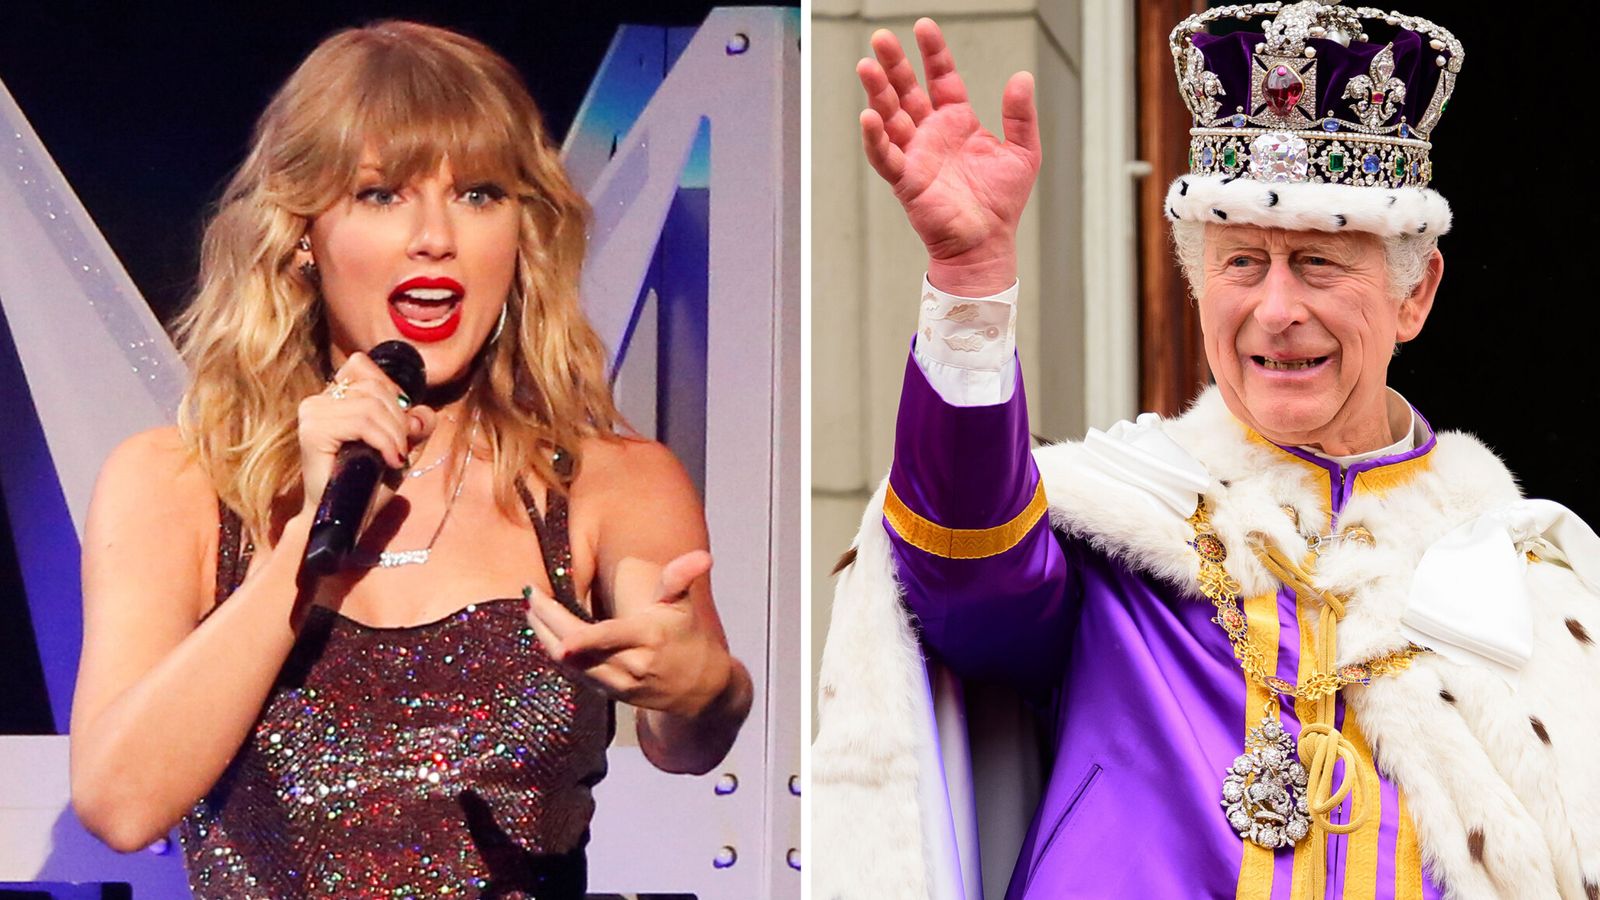 Taylor Swift 'turned down offer to perform at King's coronation'